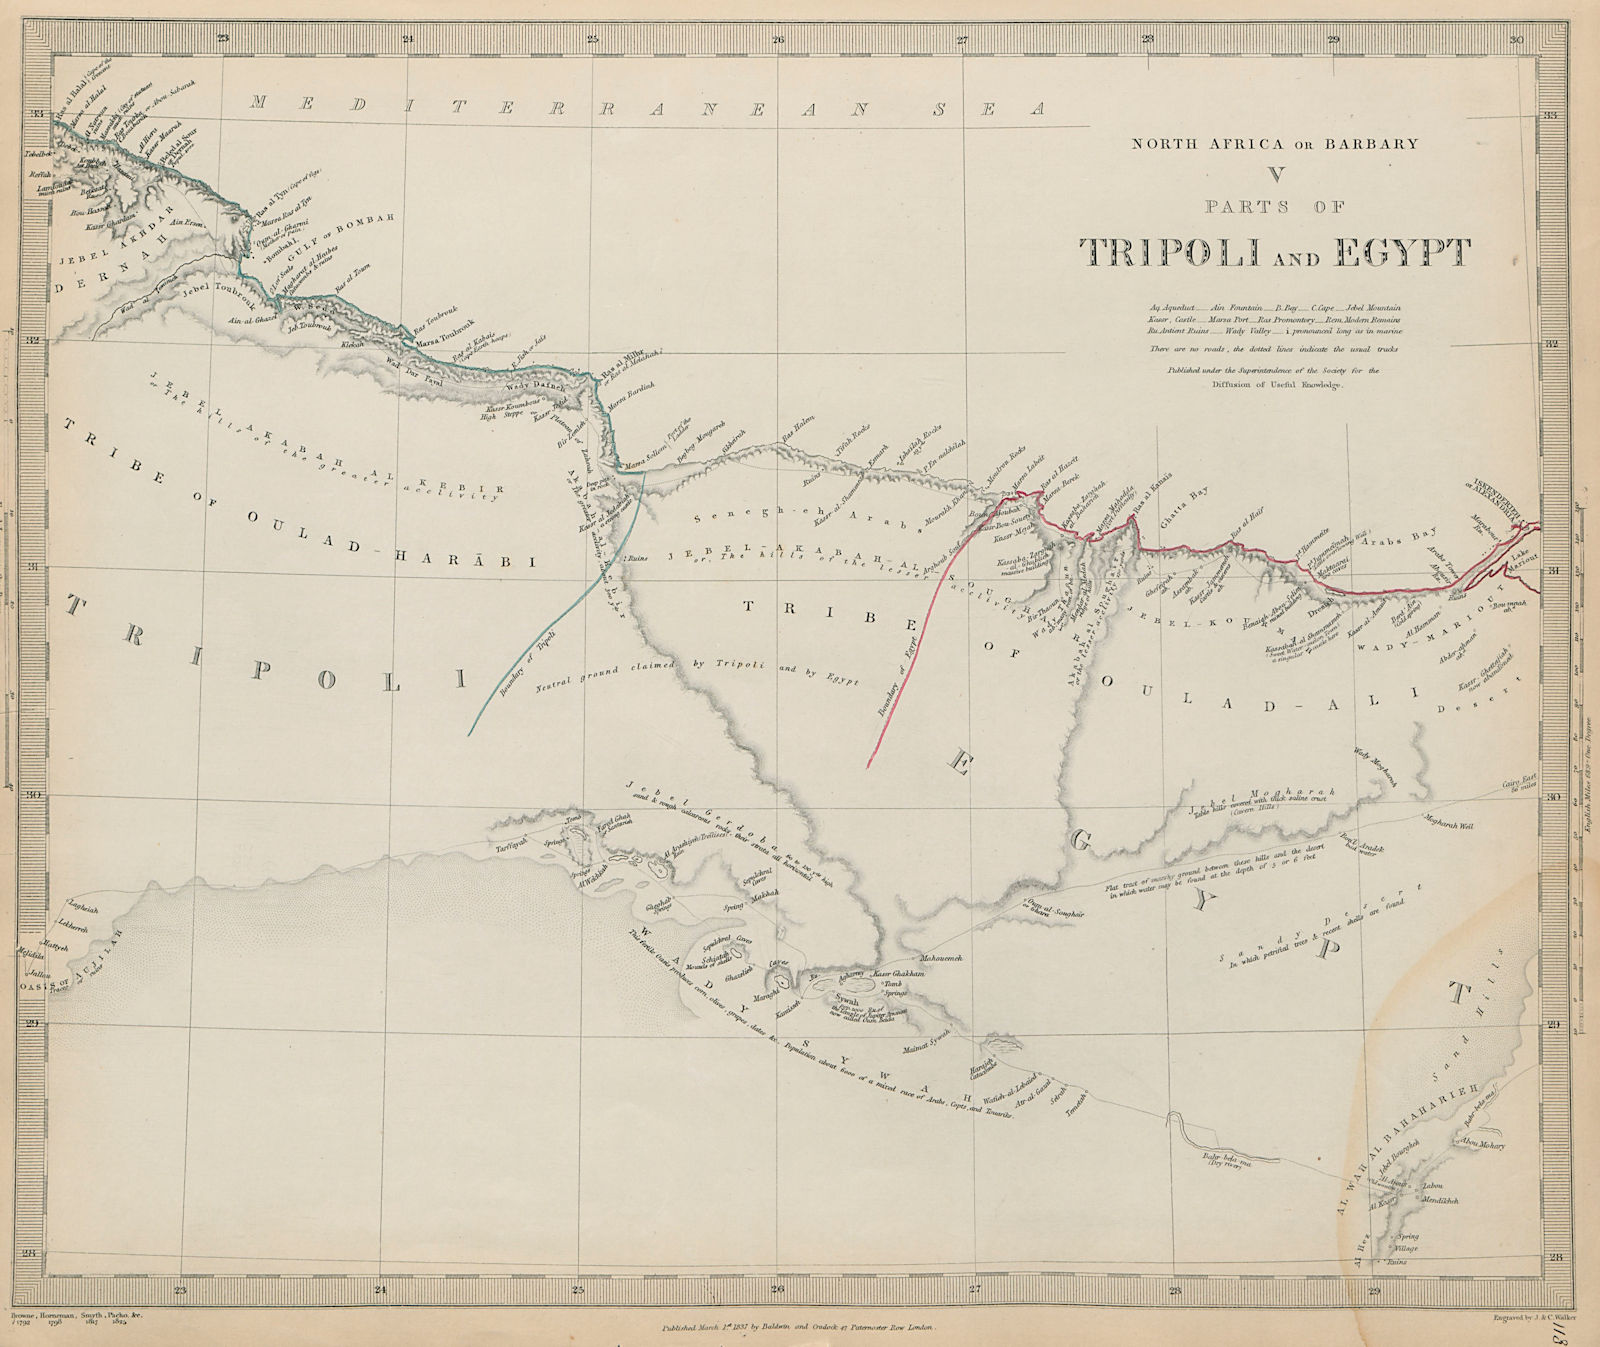 NORTH AFRICA or BARBARY. Parts of Tripoli & Egypt. Libya. Tribes SDUK 1844 map